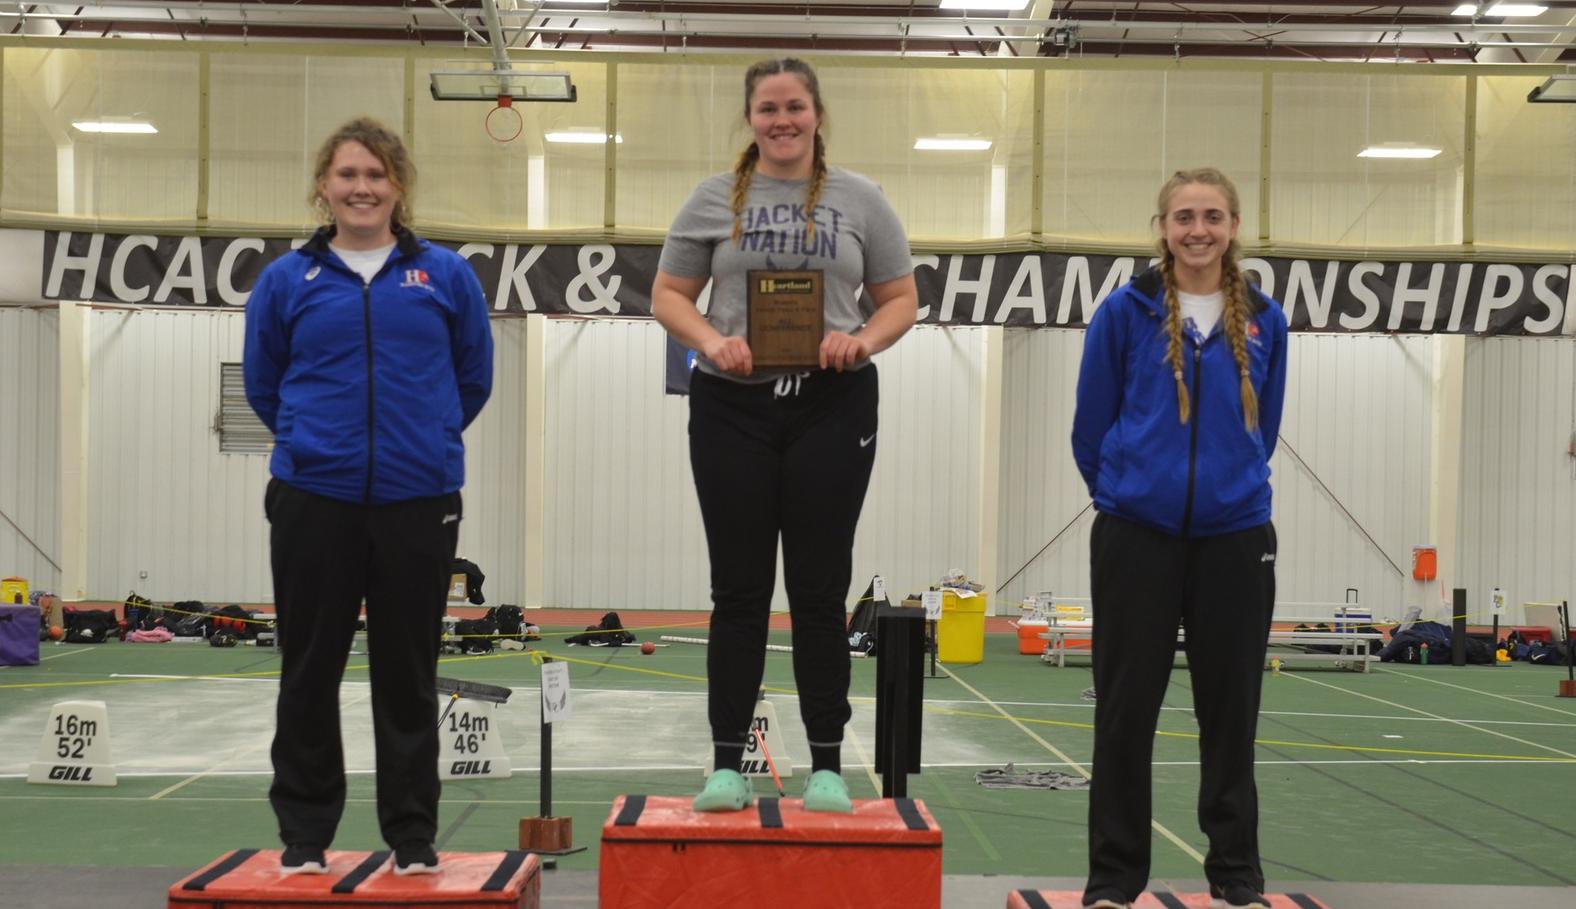 Bowman, Trimpey Post Strong Performances in HCAC Championship